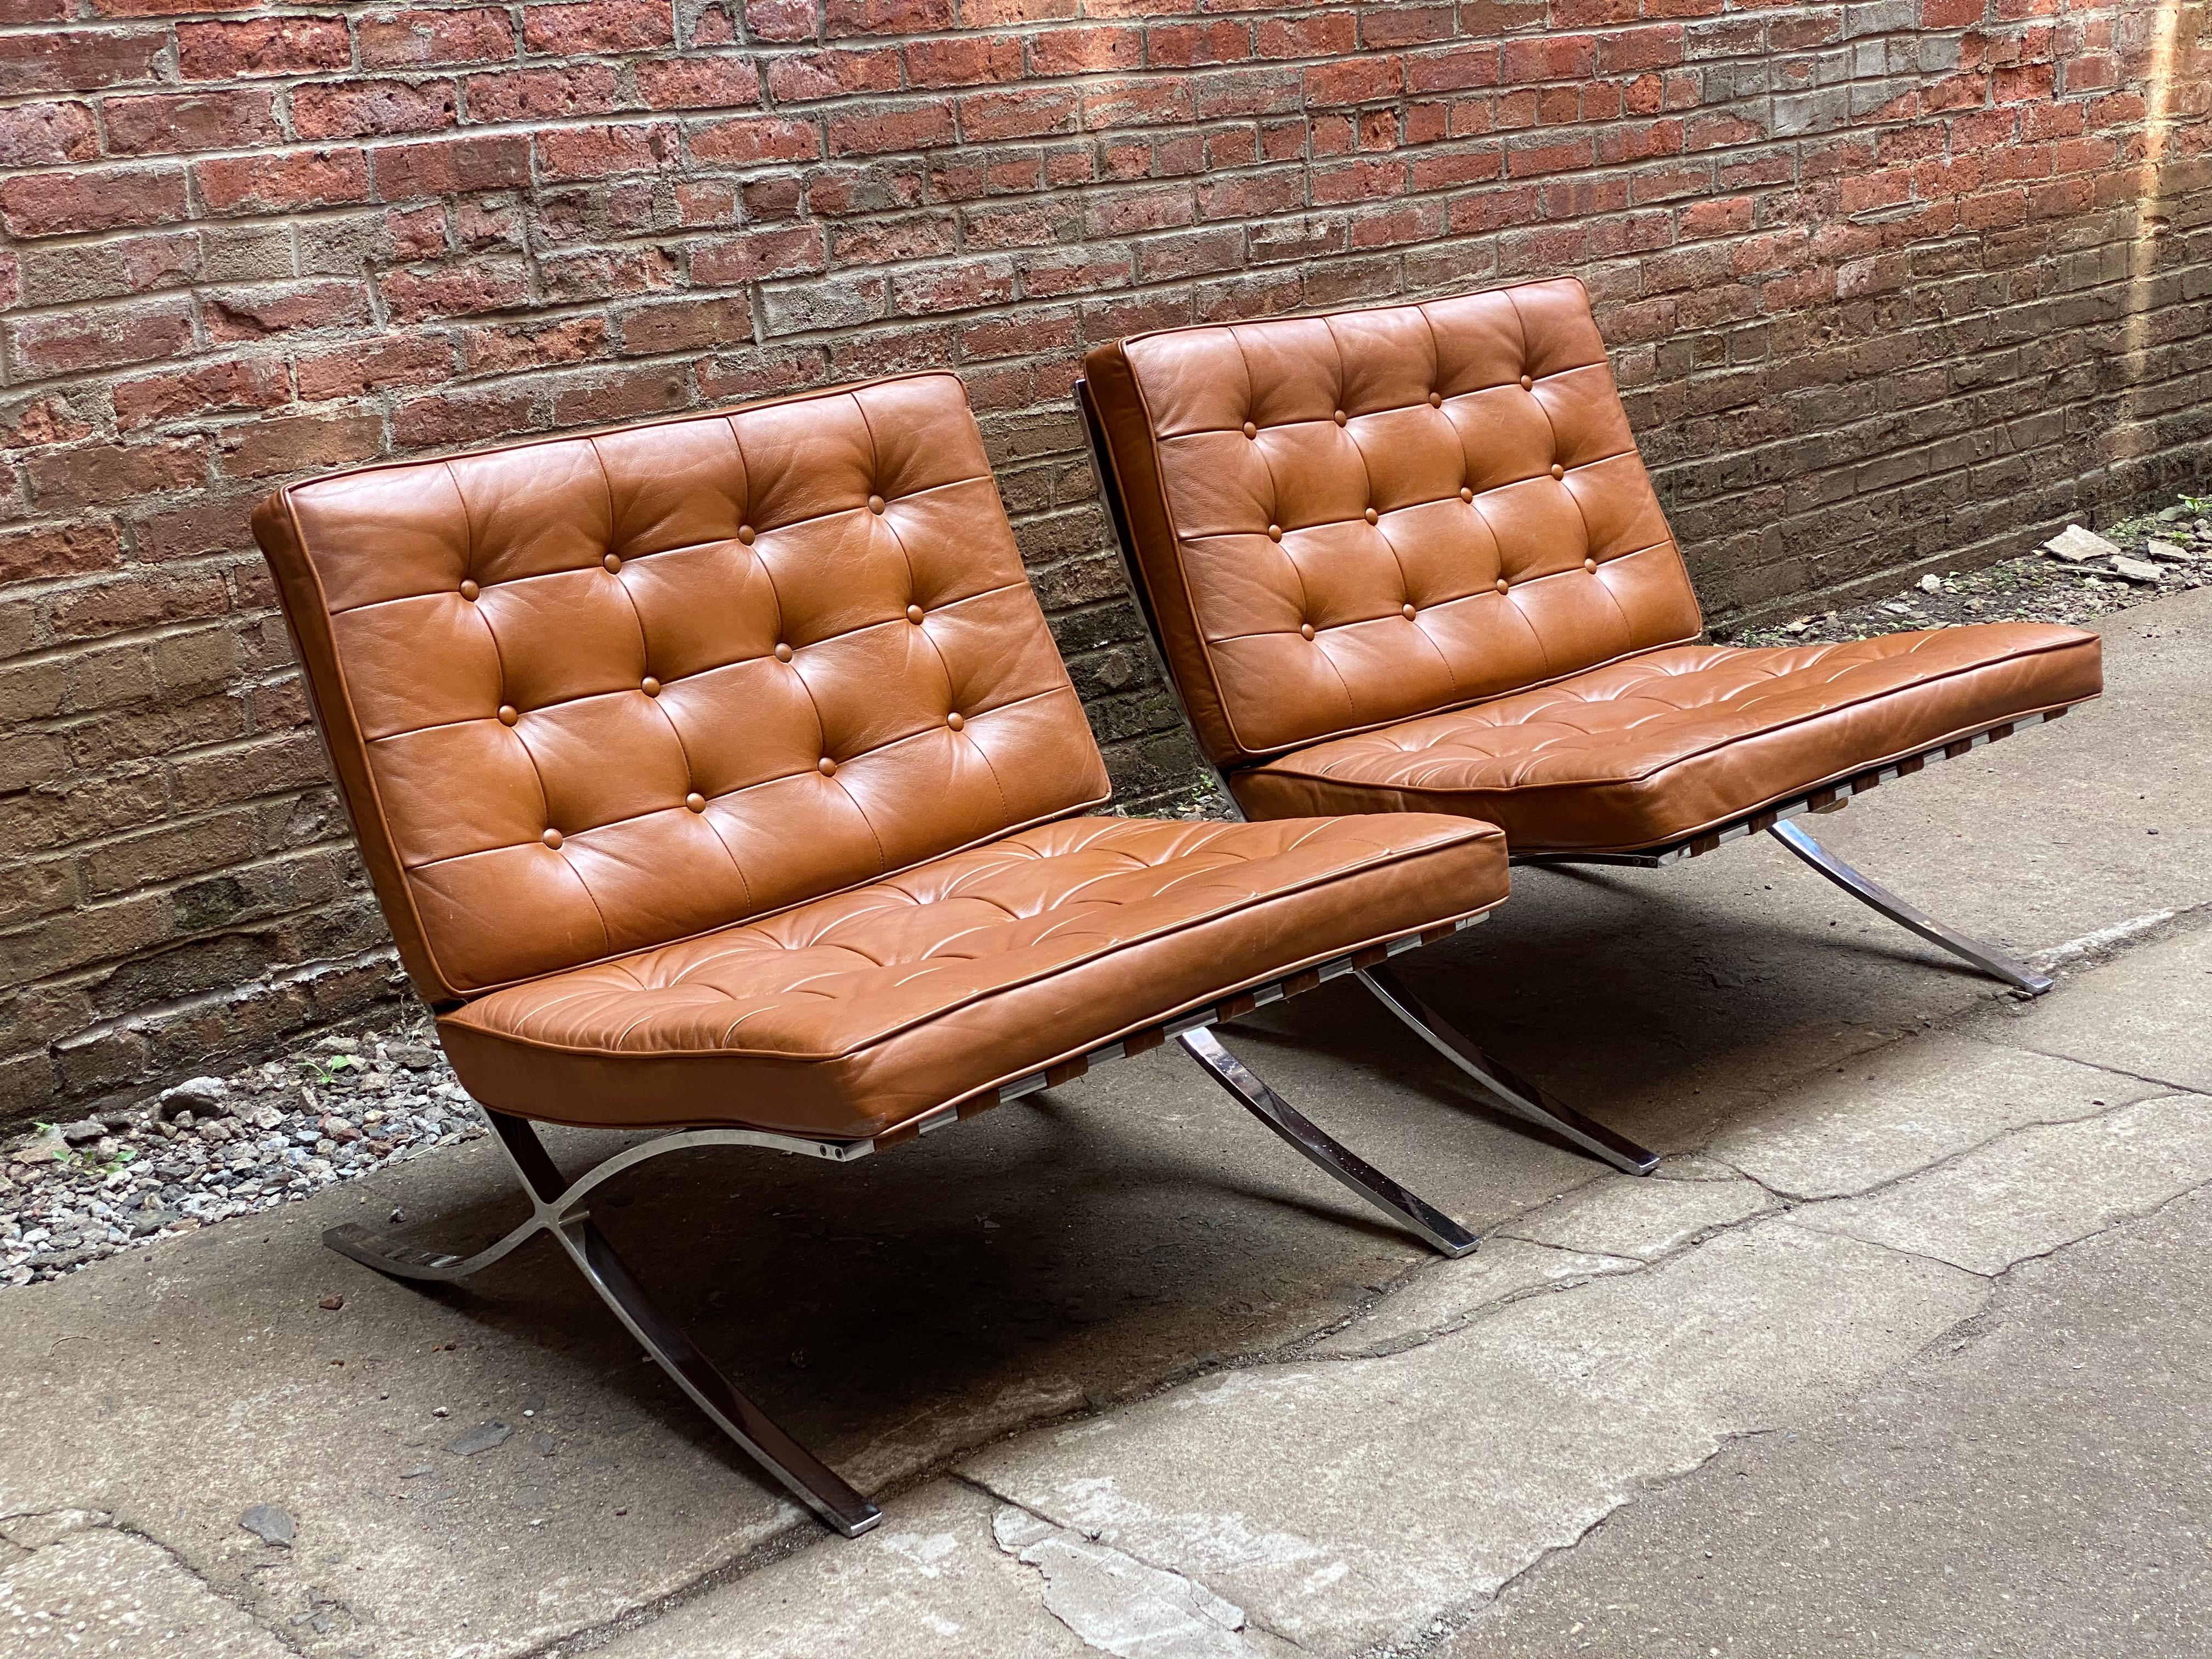 Pair of Barcelona style chairs by Charlton Company, Inc., Leeminster, Mass, circa 1970-1980. Chrome plated flat bar steel with butterscotch leather cushions. The cushions snap in place. The chrome plating and cushions are in very good condition with